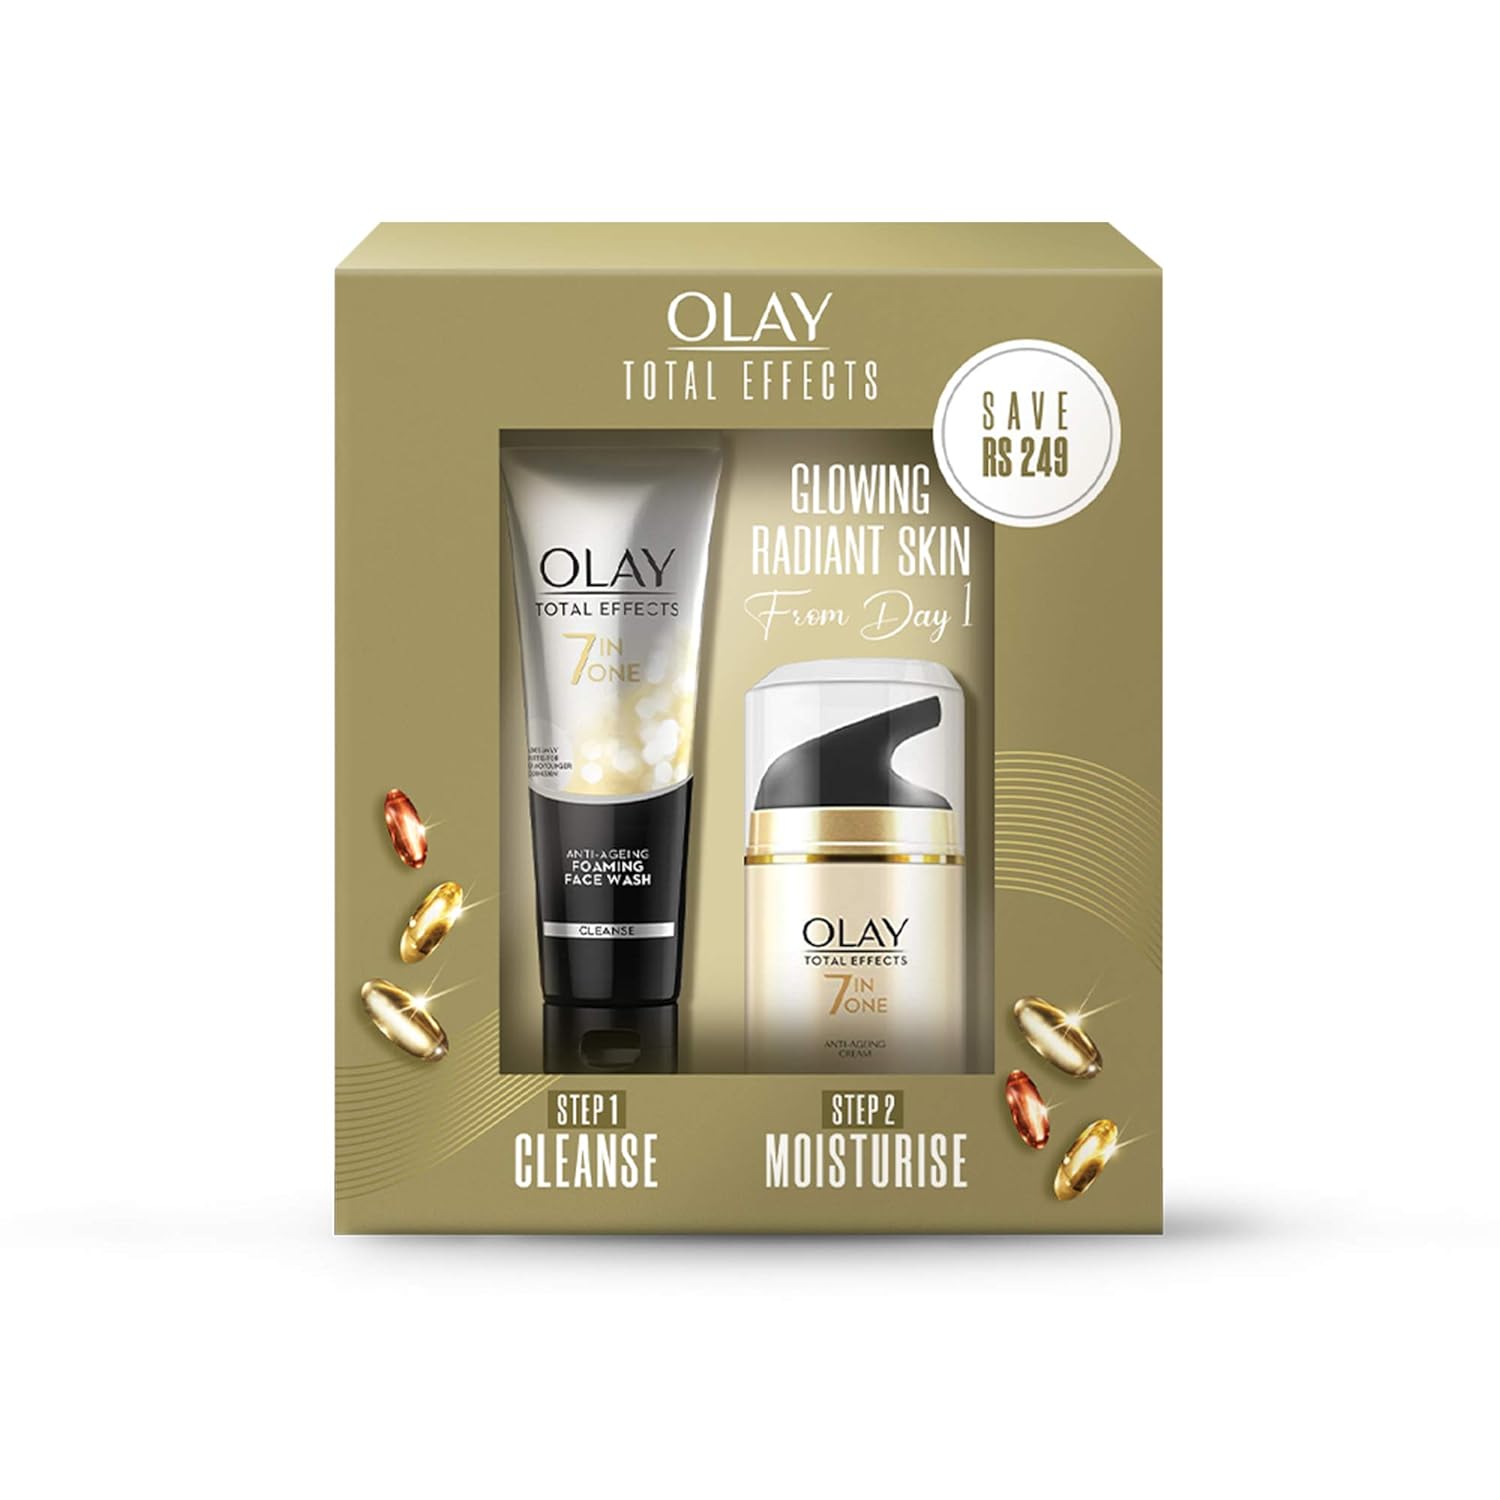 Olay Total Effects 7 in One Day cream (SPF 15) 50 g Total Effects Foaming Cleanser 100g